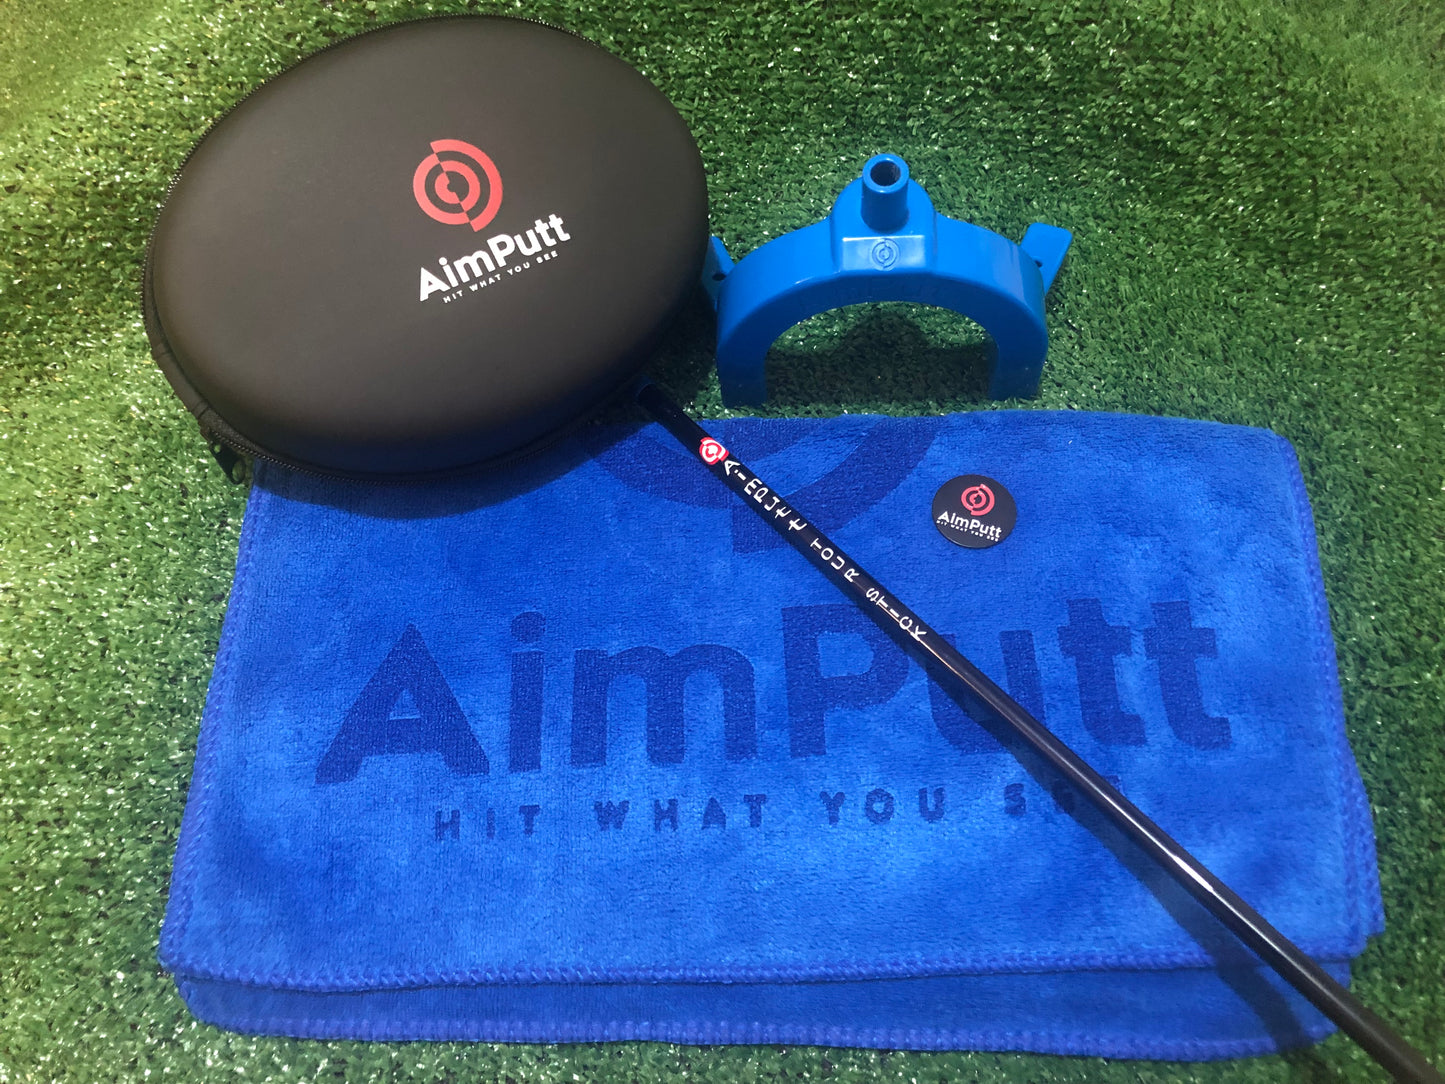 AimPutt Putting Trainer Bundle includes free gift